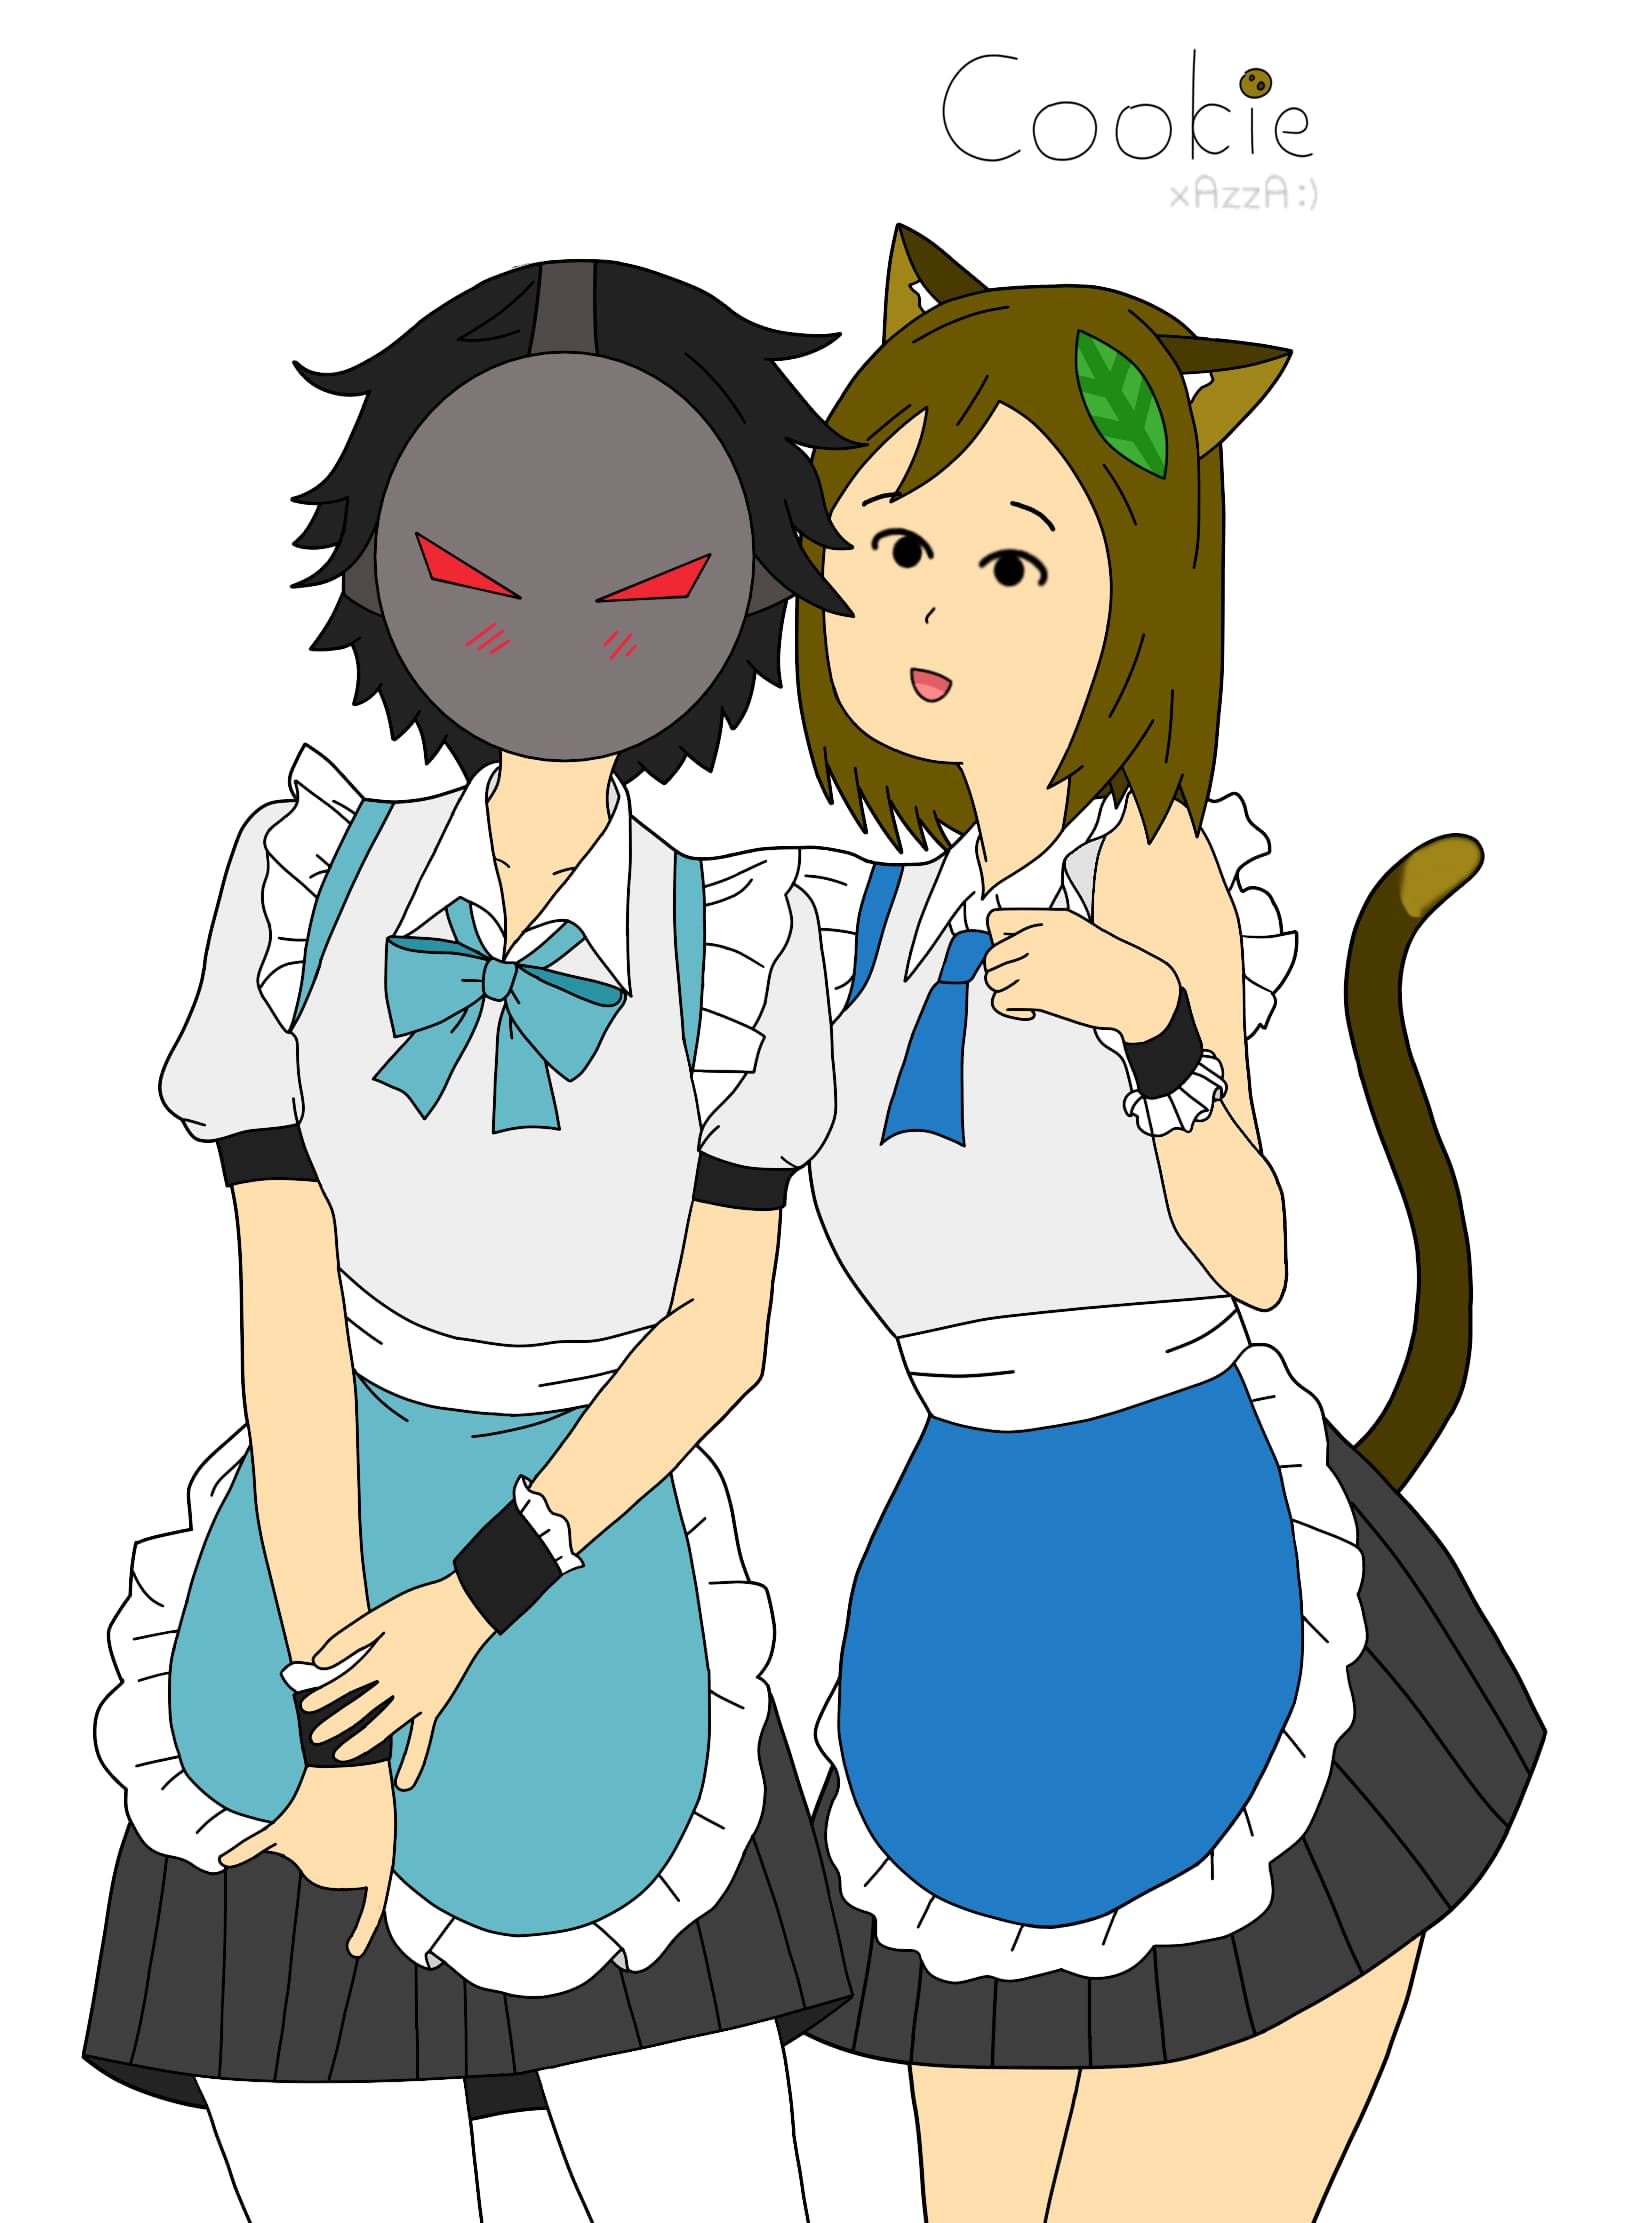 A brown-haired catgirl with a basil leaf in hair, enthusiastically wrapping her arm around another character, who has black hair and is wearing a grey metal mask with red triangle eyes strapped onto their face. The mask is blushing Both of them are wearing similar maid outfits with collars around their hands, and while both outfits are accented with the color blue, the catgirl's outfit uses a slightly darker shade. The black haired character looks uncomfortable and is tugging at the collar on their right hand with their left hand, while slightly lifting up their apron with their right hand. While the black-haired character is wearing white leggings and her maid outfit has puffy shoulders, the catgirl is not wearing leggings and her outfit doesn't have the puffy shoulders. The catgirl also has her brown tail visible behind her.